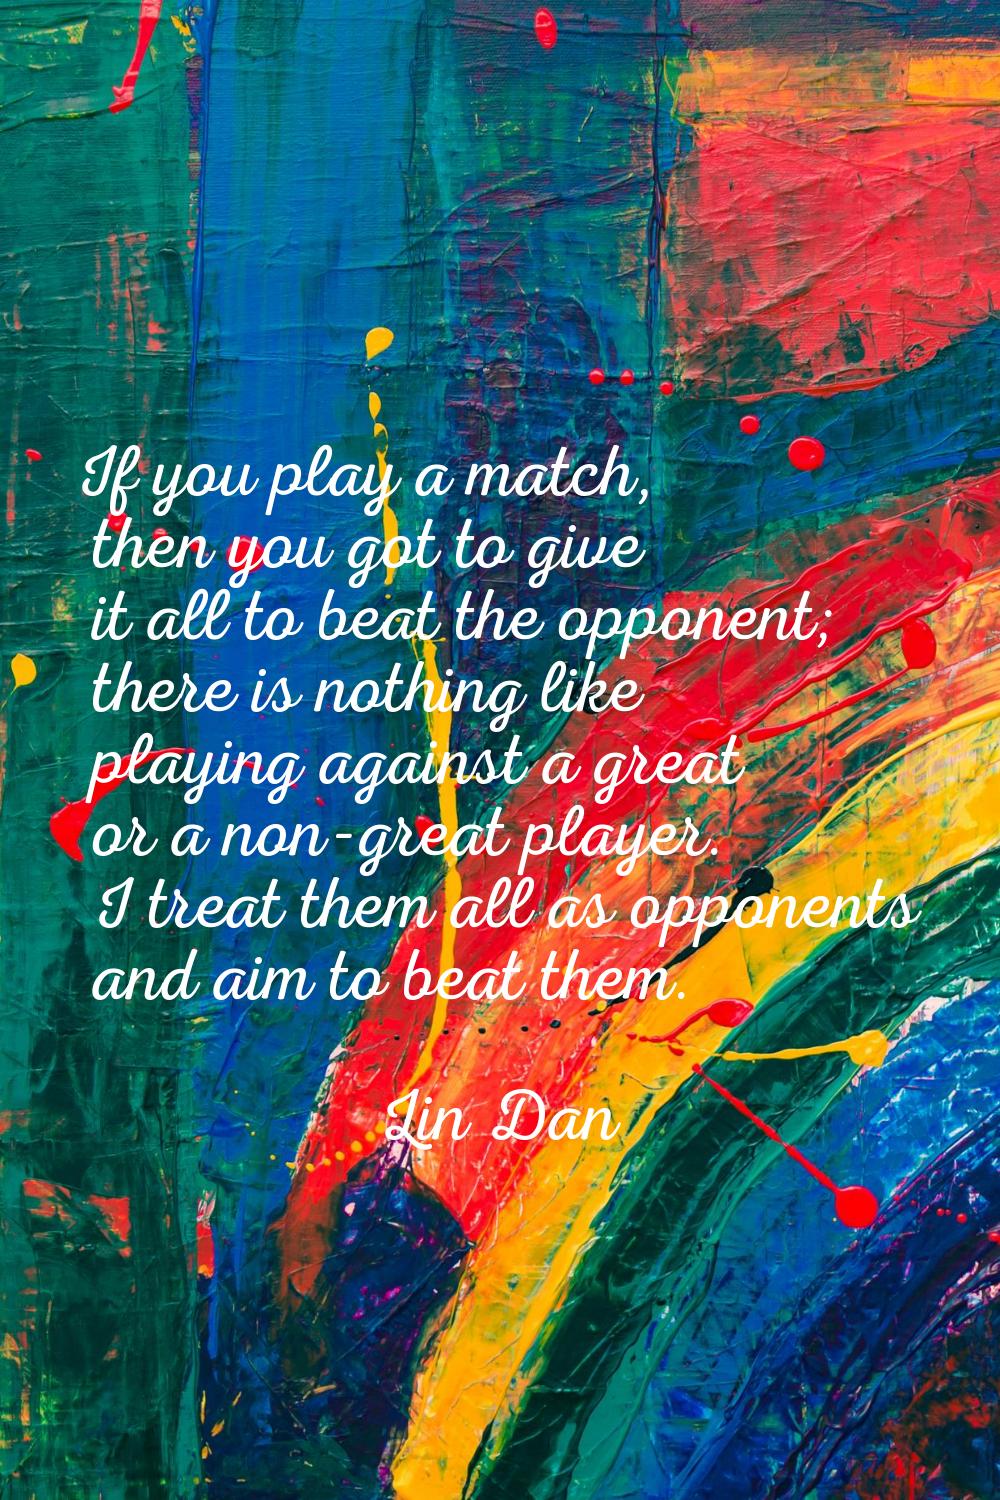 If you play a match, then you got to give it all to beat the opponent; there is nothing like playin